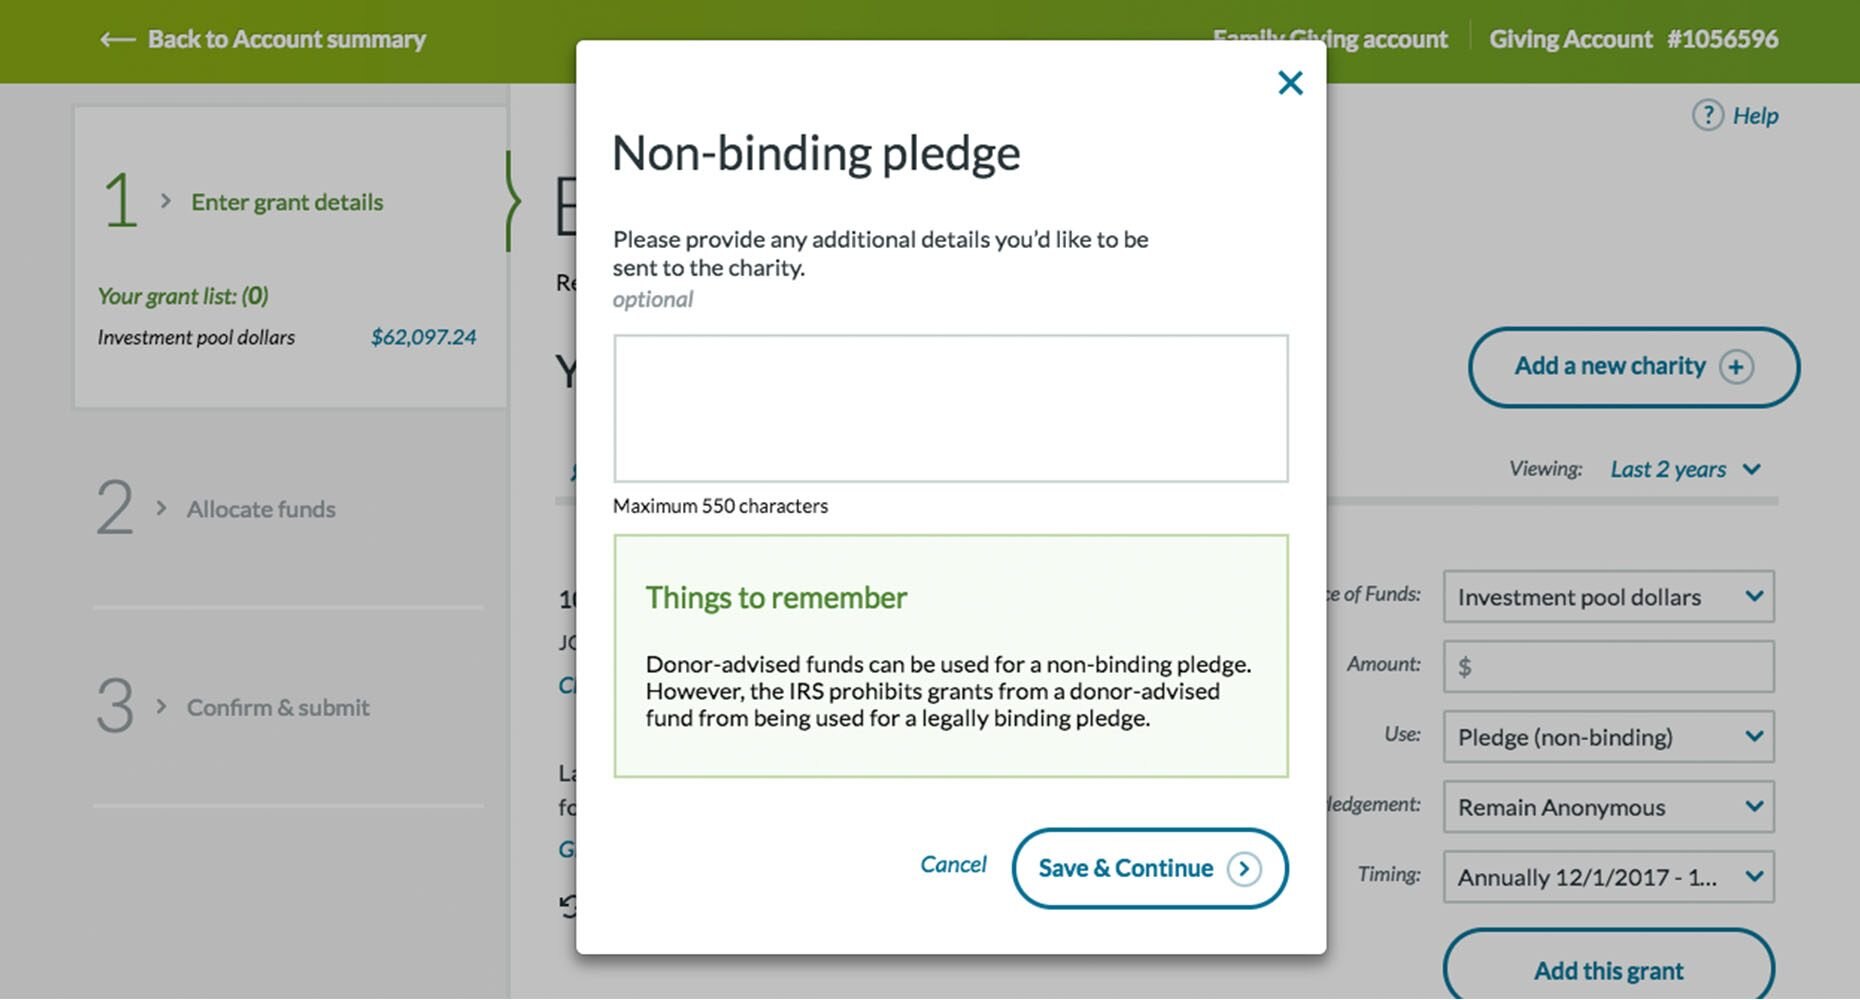 Making a non-binding pledge with a donor-advised fund